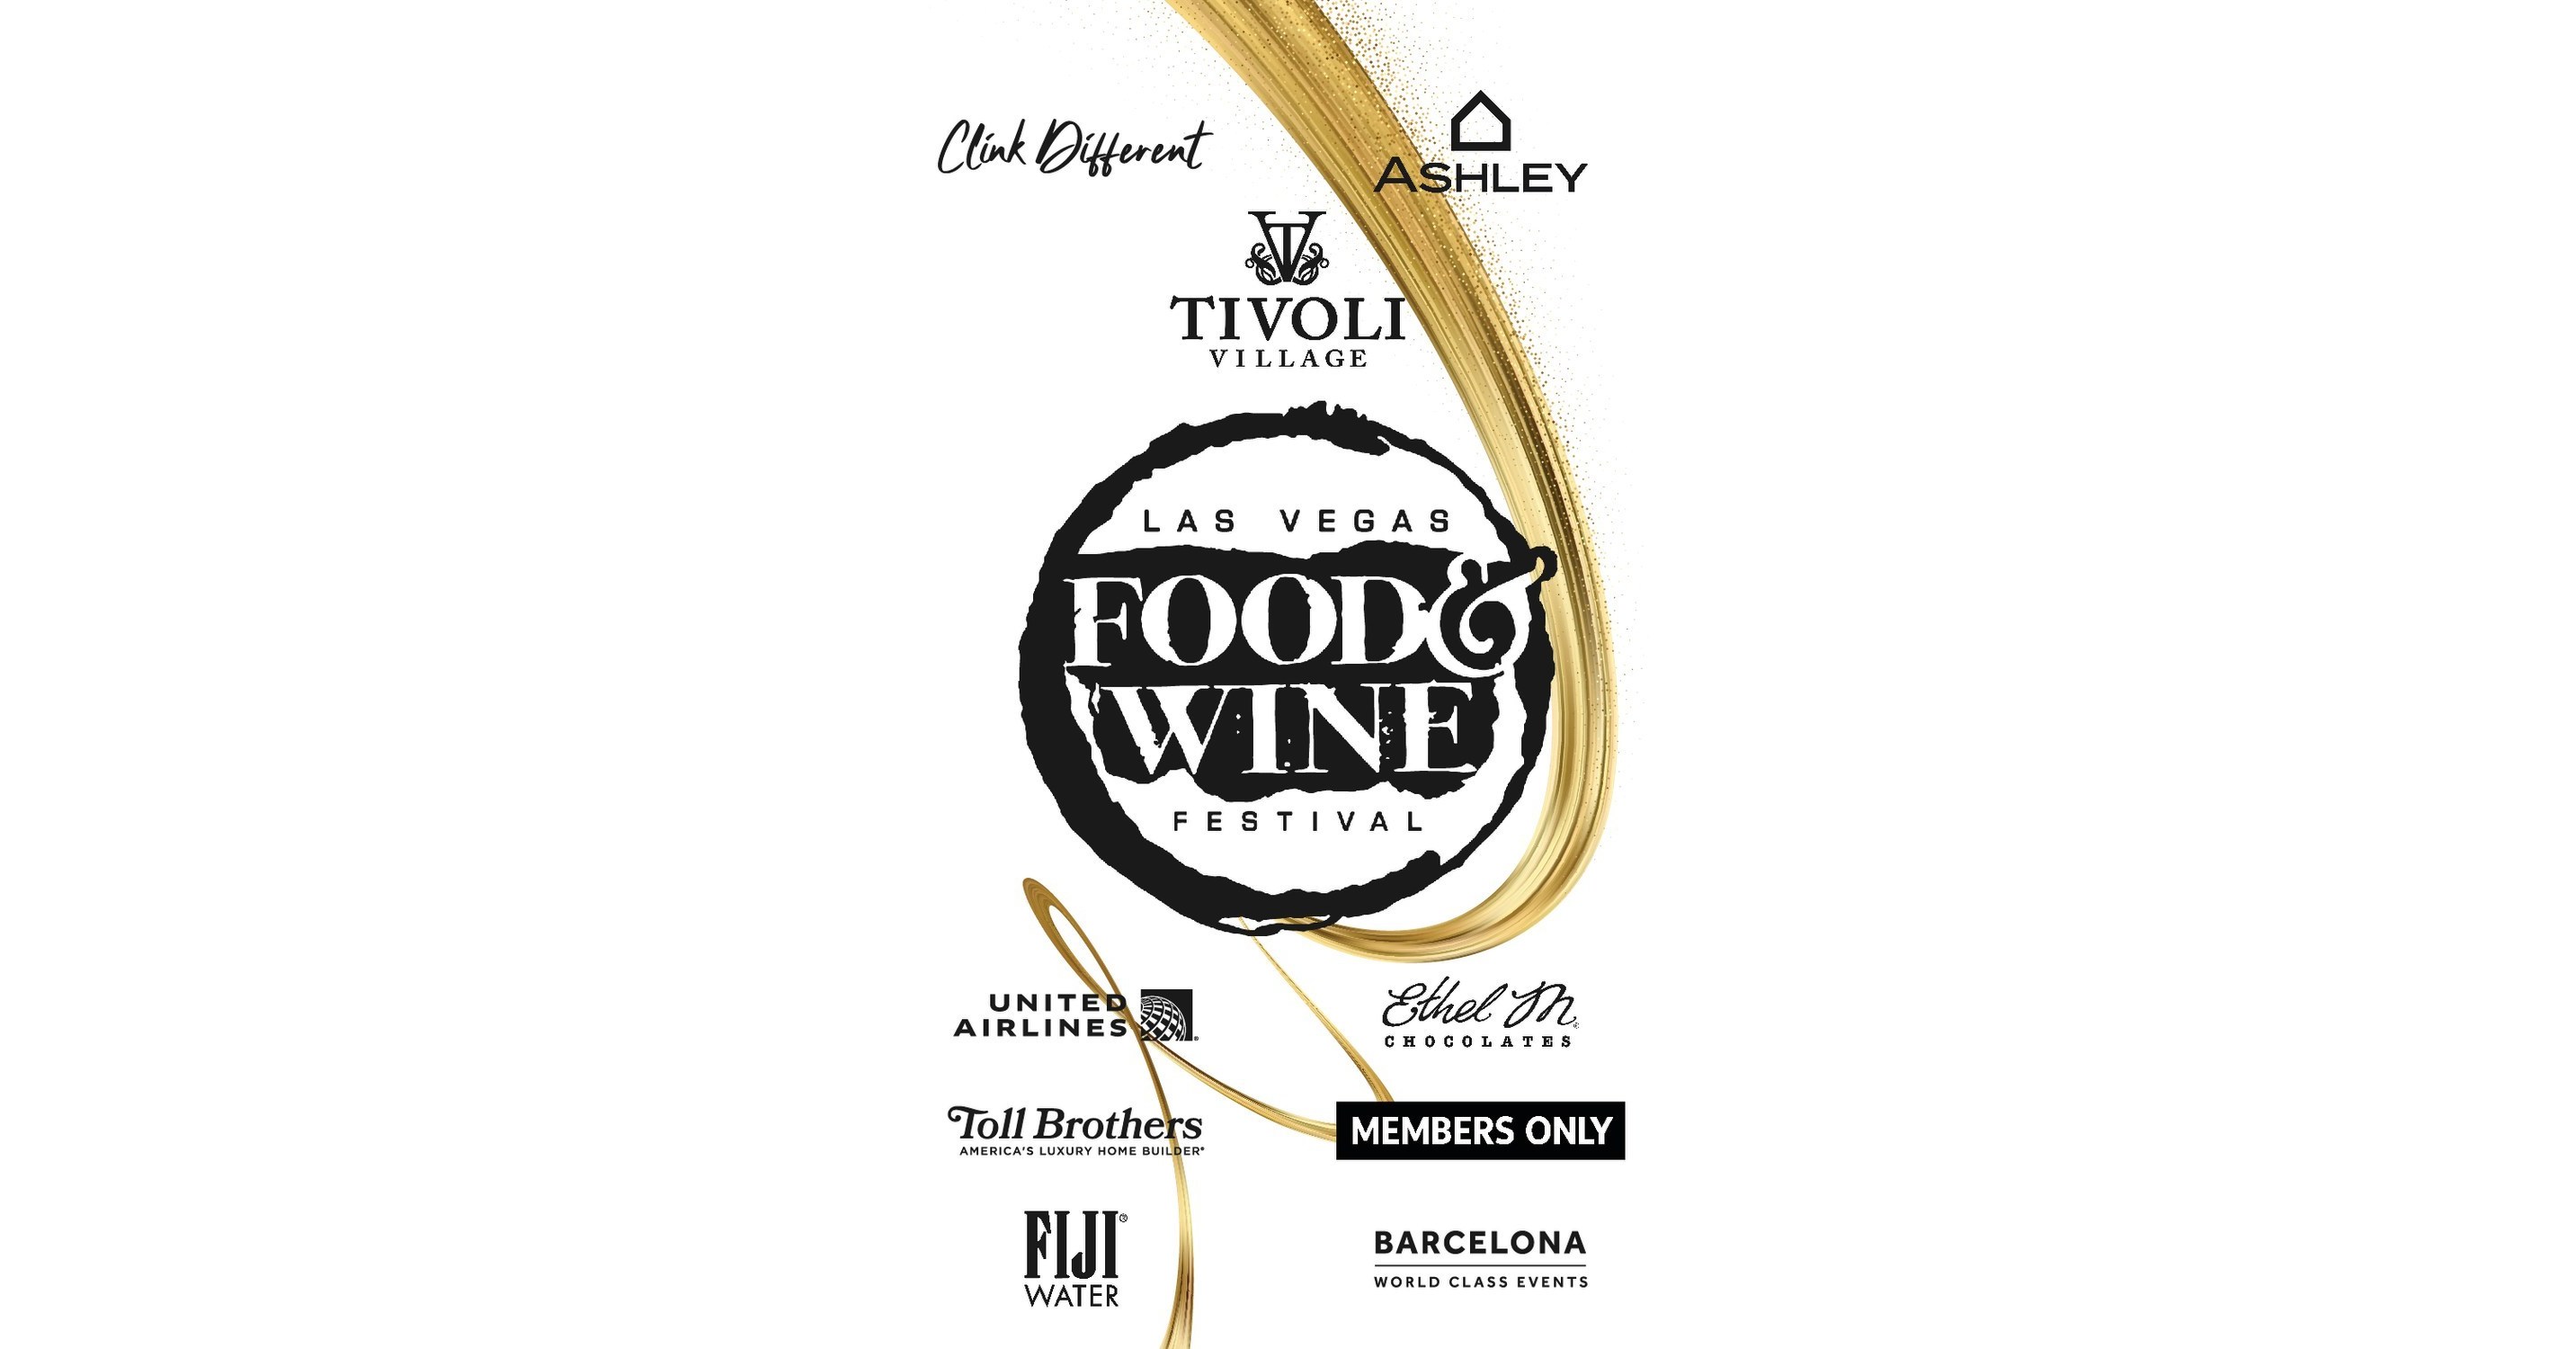 Come Celebrate With Us at the Hottest Food & Wine Festival of the Year Featuring the World’s Top Celebrity Chefs on the Heart of the Las Vegas Strip